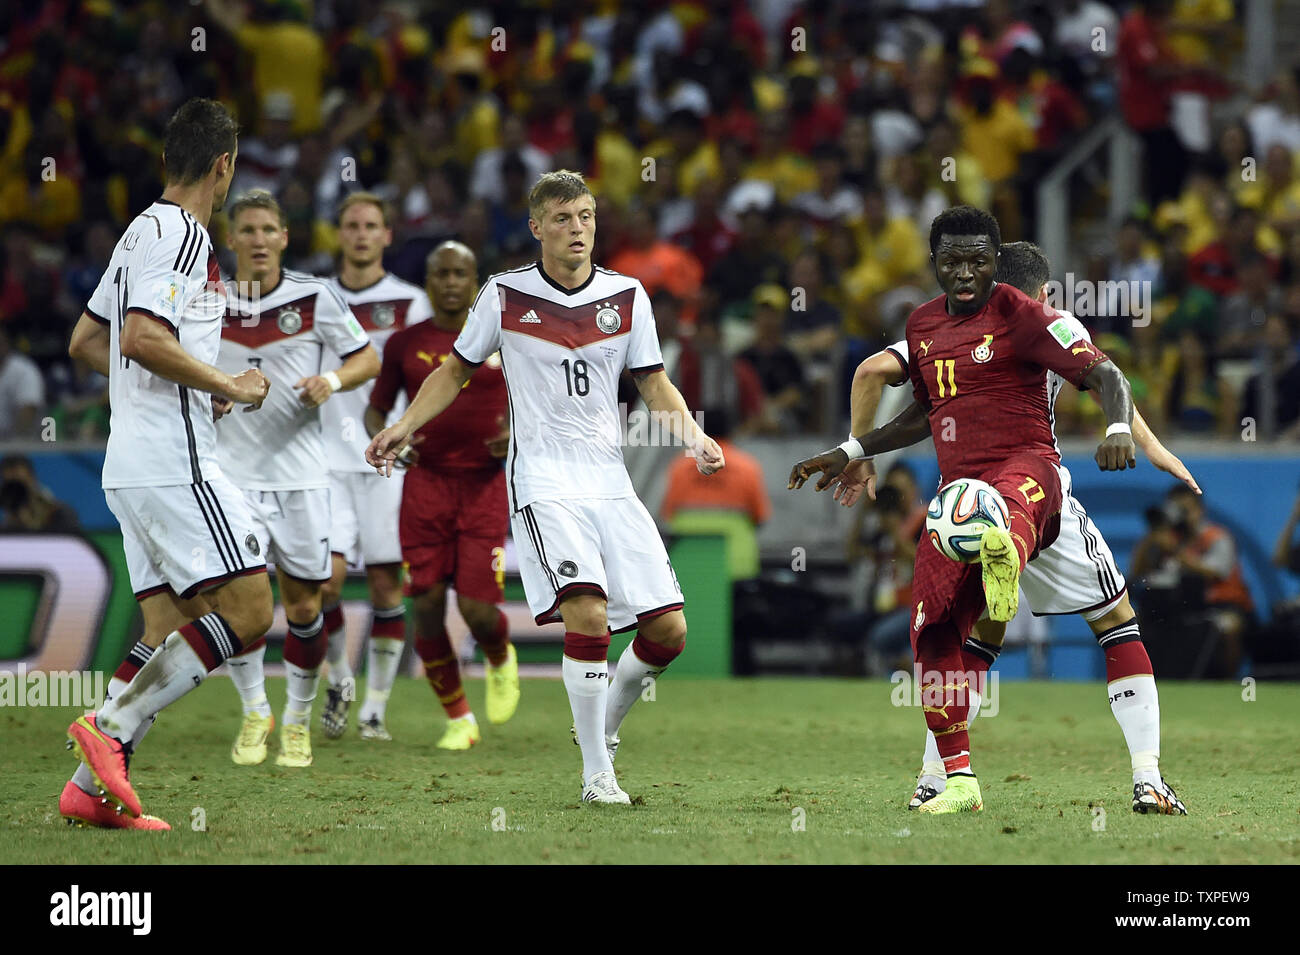 Toni Kroos (L) of Germany competes with Sulley Muntari of Ghana during the 2014 FIFA World Cup Group G match at the Estadio Castelao in Fortaleza, Brazil on June 21, 2014. UPI/Chris Brunskill Stock Photo